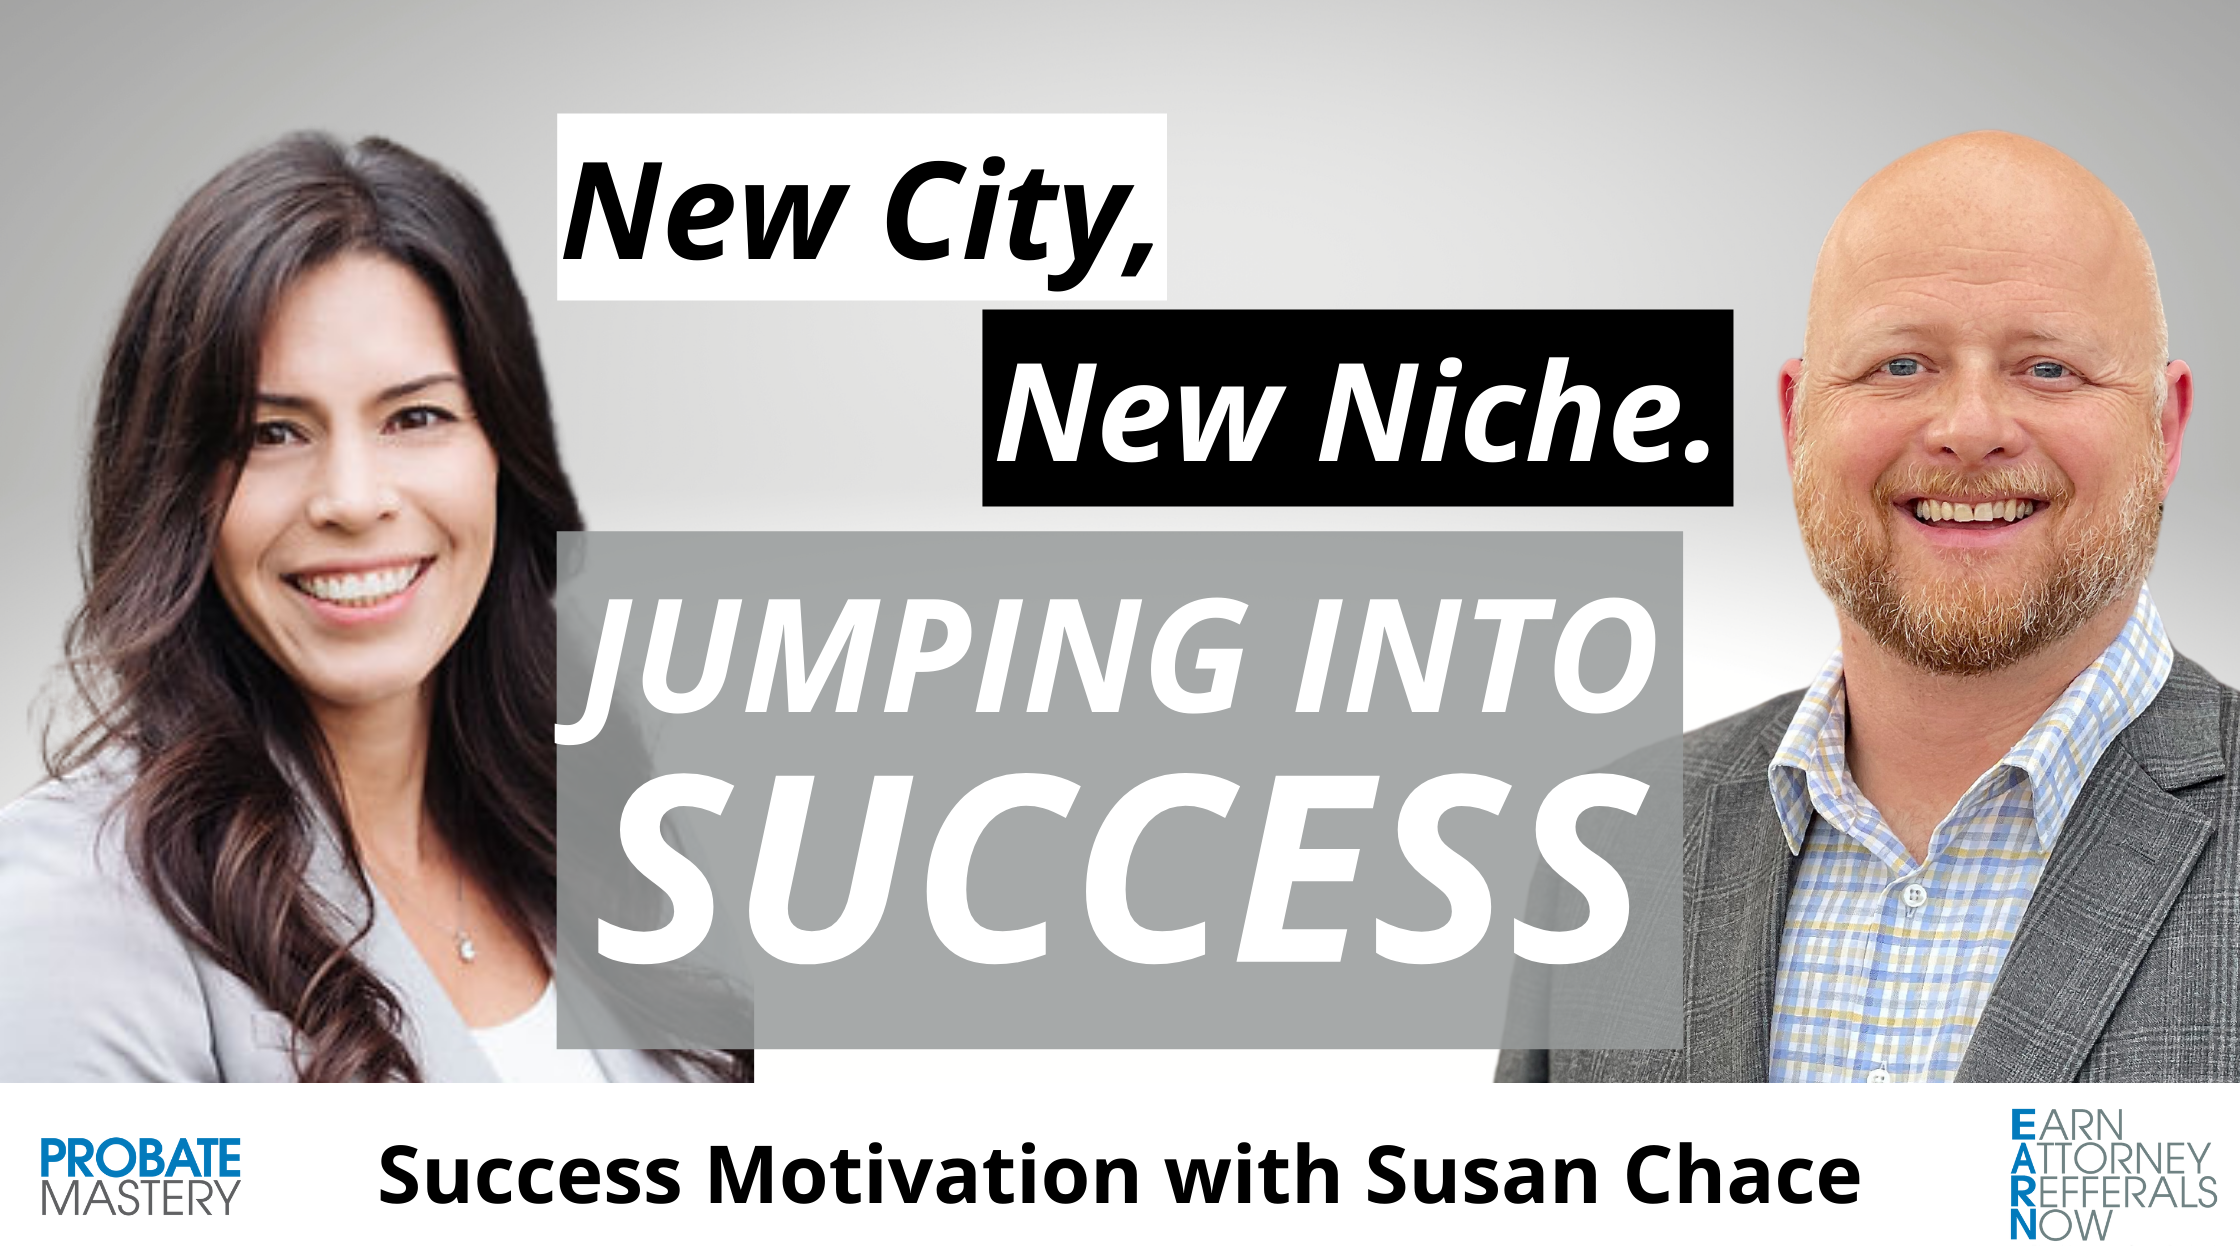 Featured image for “Starting real estate in a new city, new niche | Success Motivation with Susan Chace”